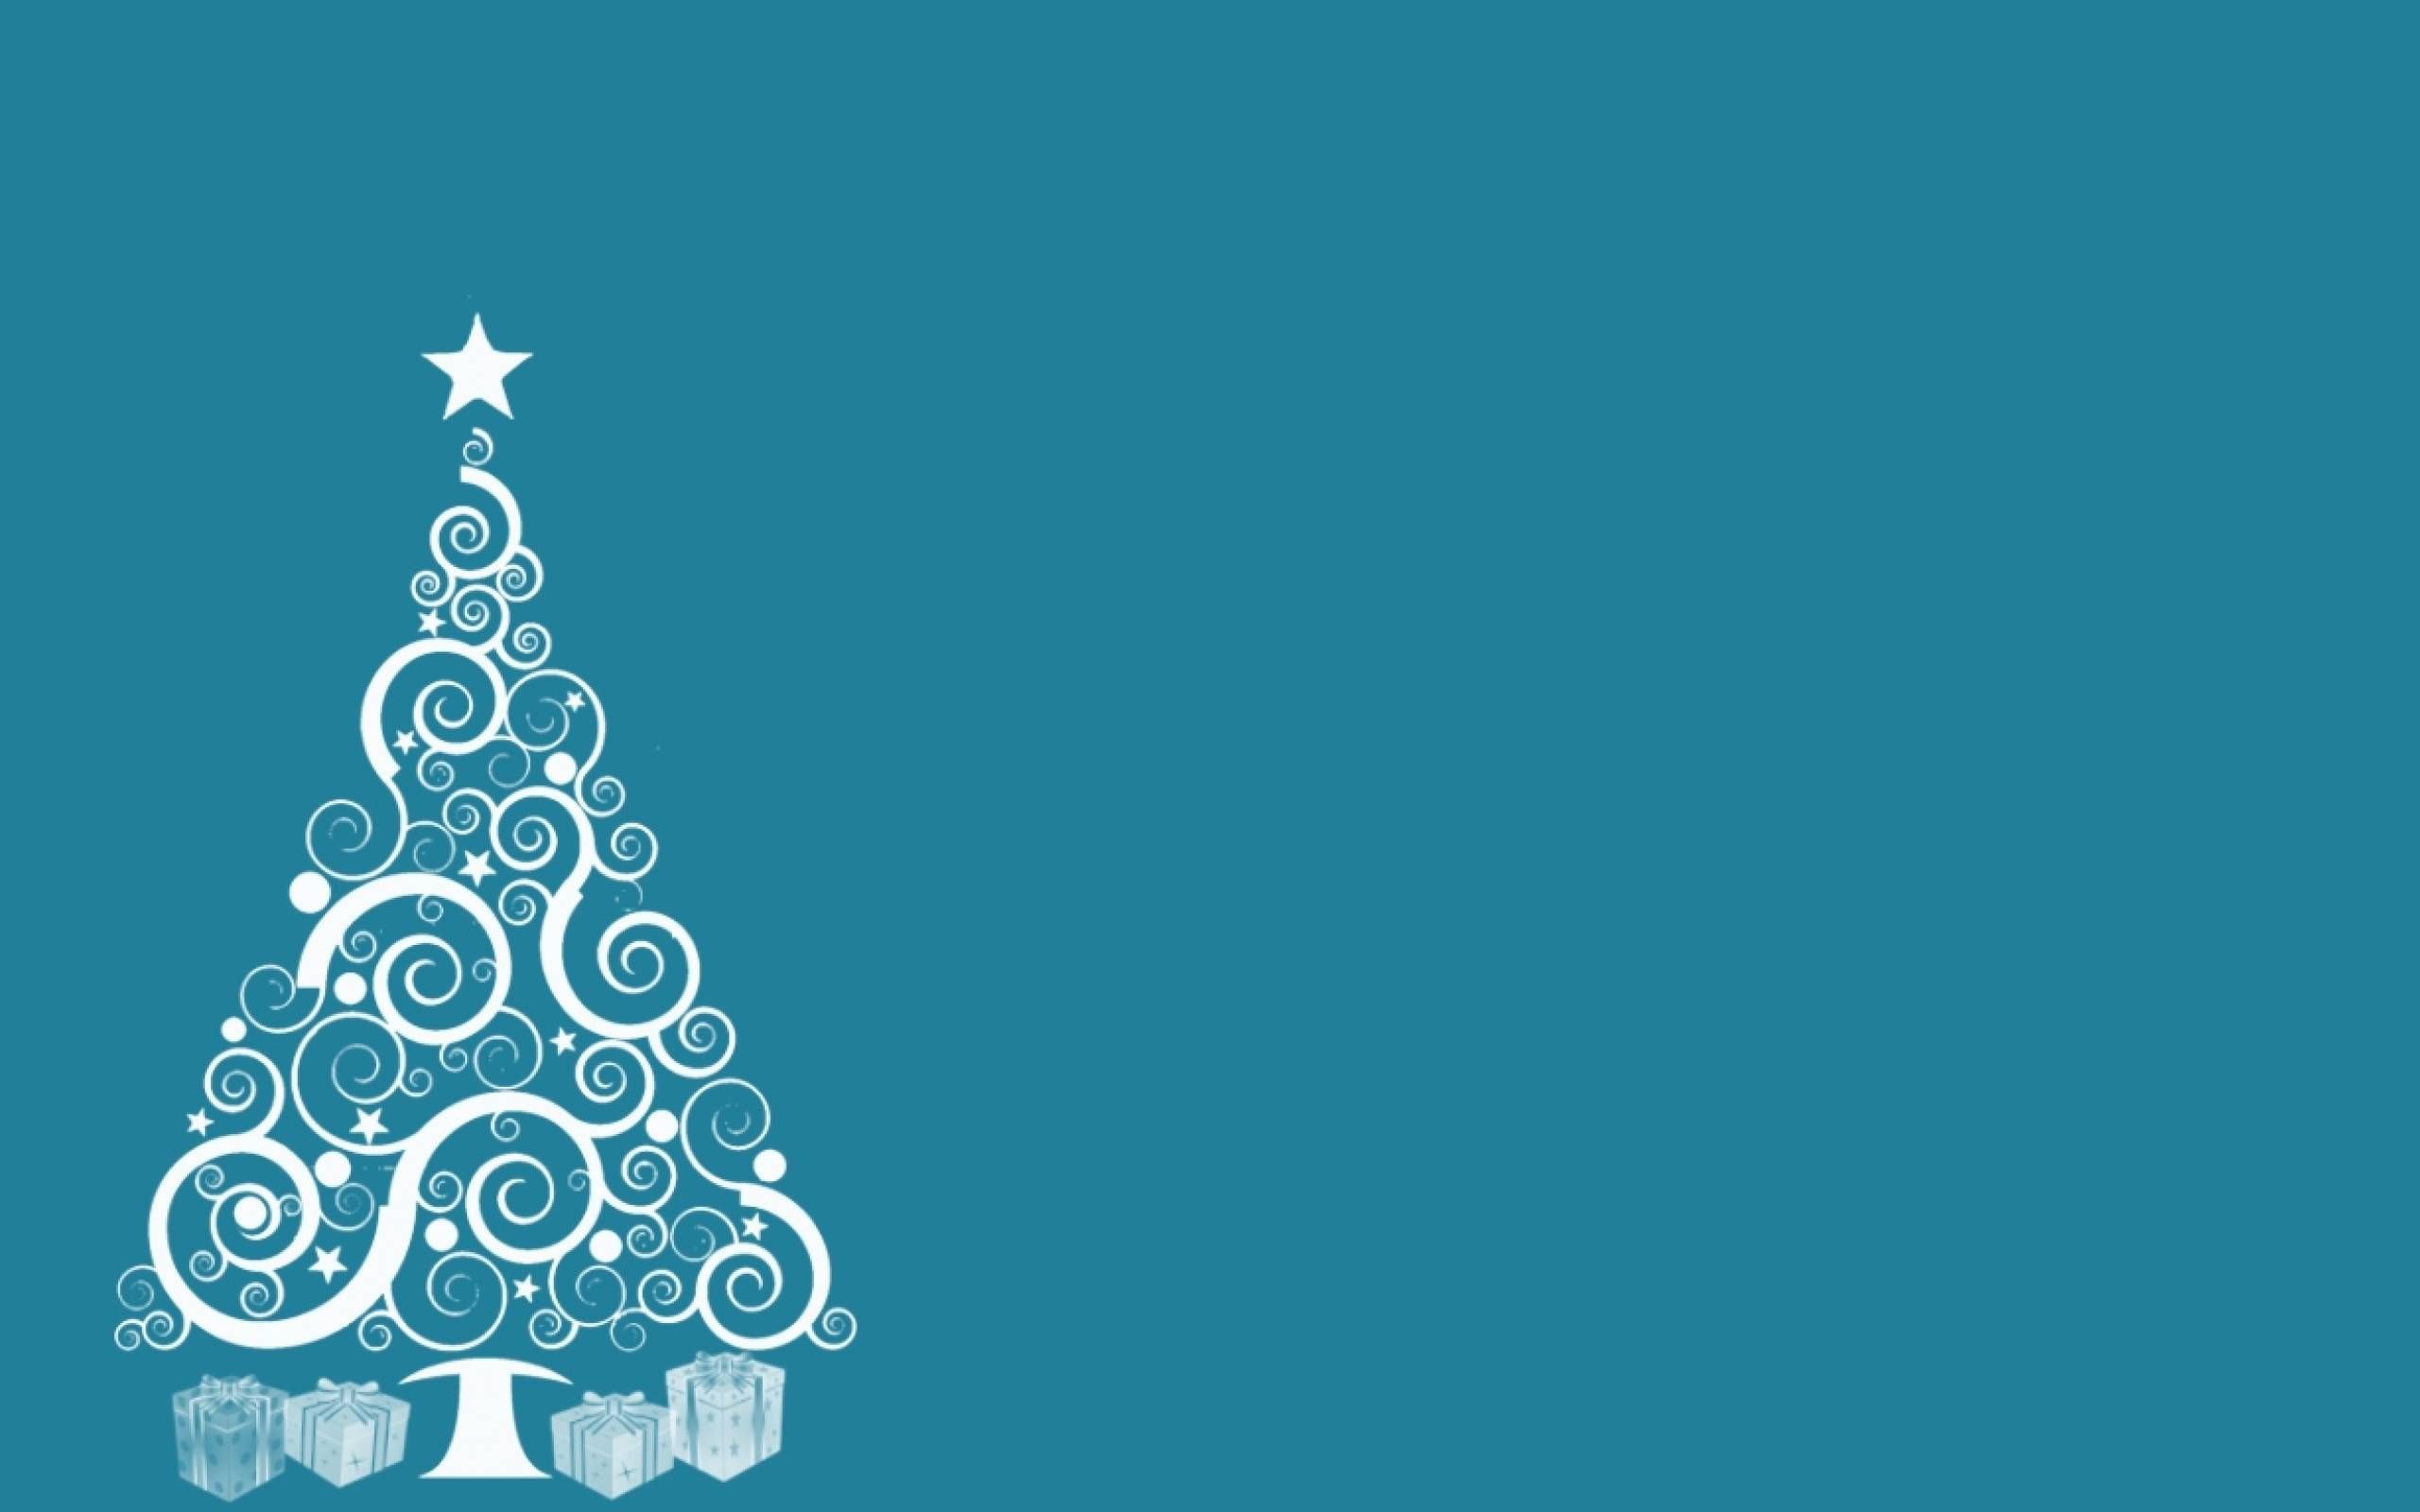 Easy To Draw Christmas Tree For A Hand Made Card. Christmas Background Image, Christmas Wallpaper, Christmas Background